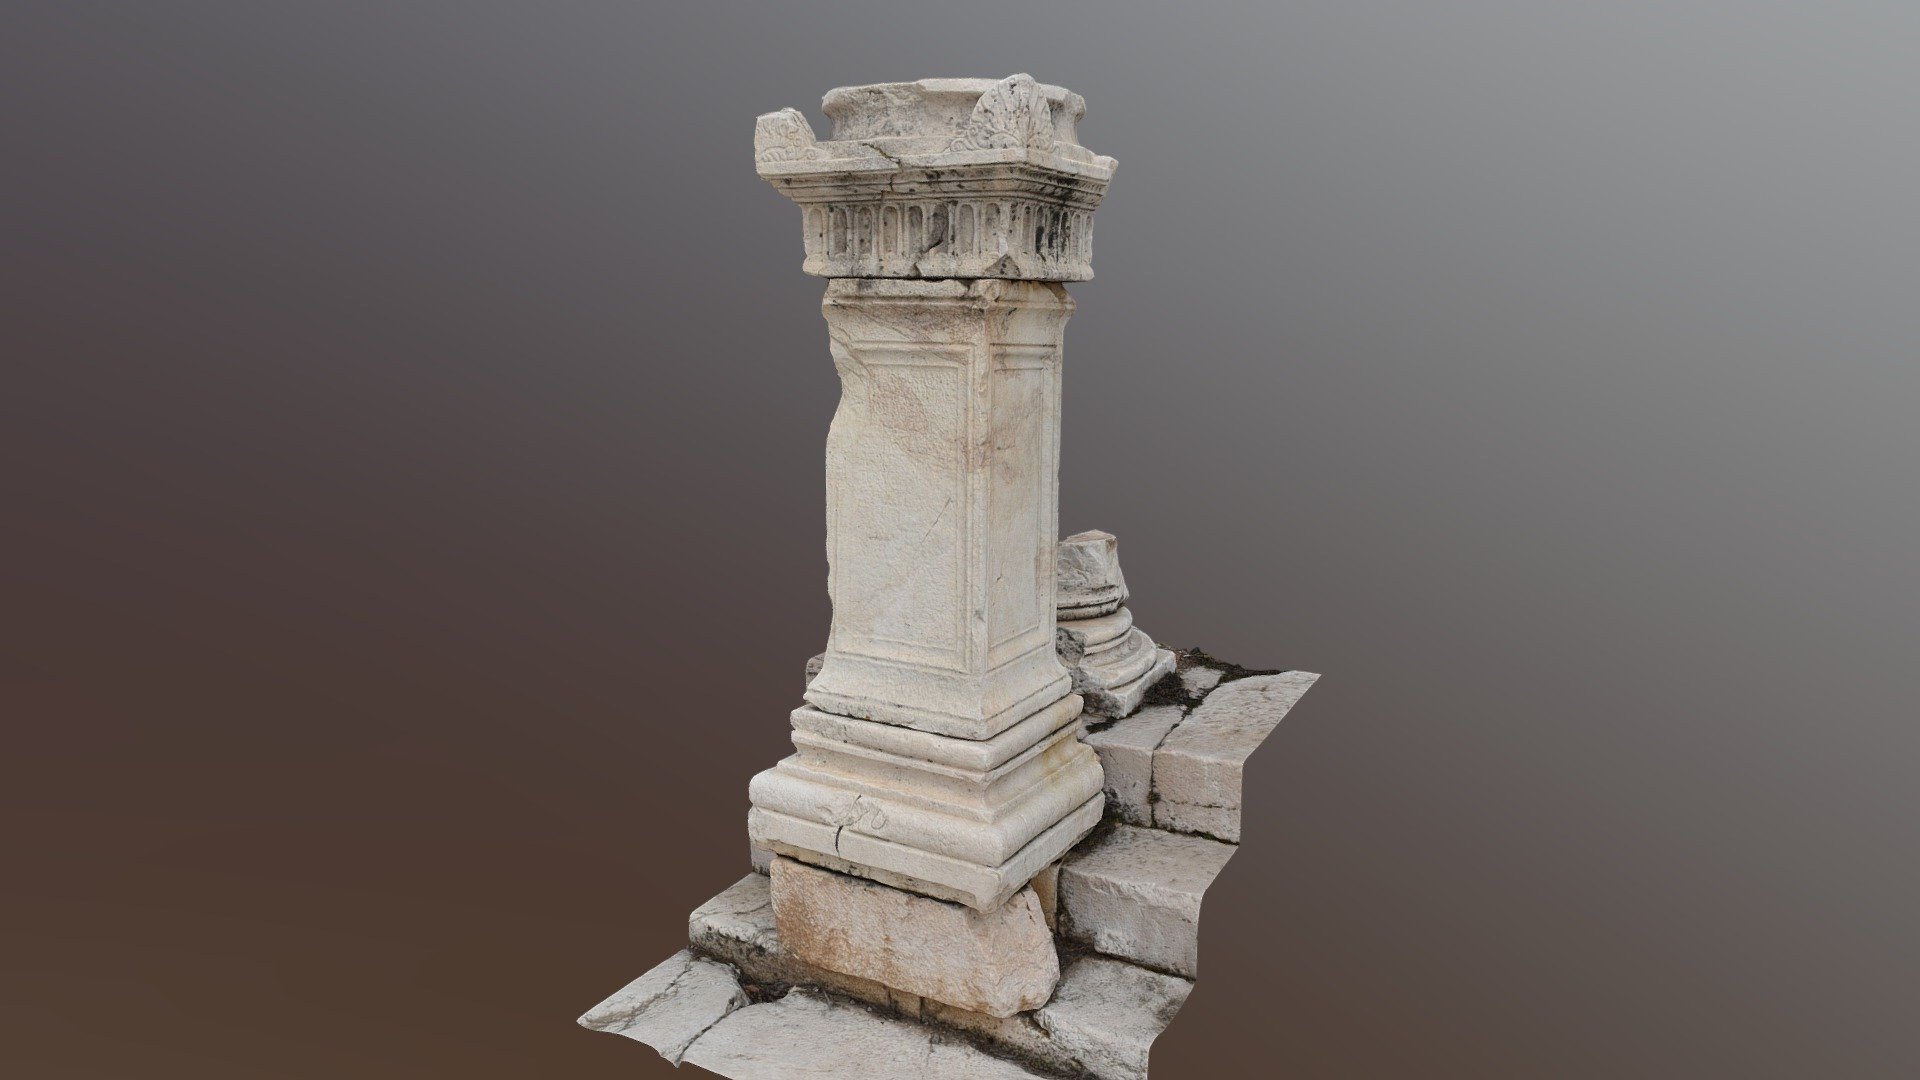 Pillar with a pedestal for a statue in ancient greek city of Sagalassos.

Located next to this pillar: https://skfb.ly/oEvOZ

Wikipedia page: https://en.wikipedia.org/wiki/Sagalassos

Location: https://goo.gl/maps/e1MP3nhmRWrwmQB26

Panorama: https://goo.gl/maps/2LQPyYdqG6pWYbtk6 - Pillar with a statue pedestal in Sagalassos - Buy Royalty Free 3D model by Mikhail Volkov (@mgv) 3d model